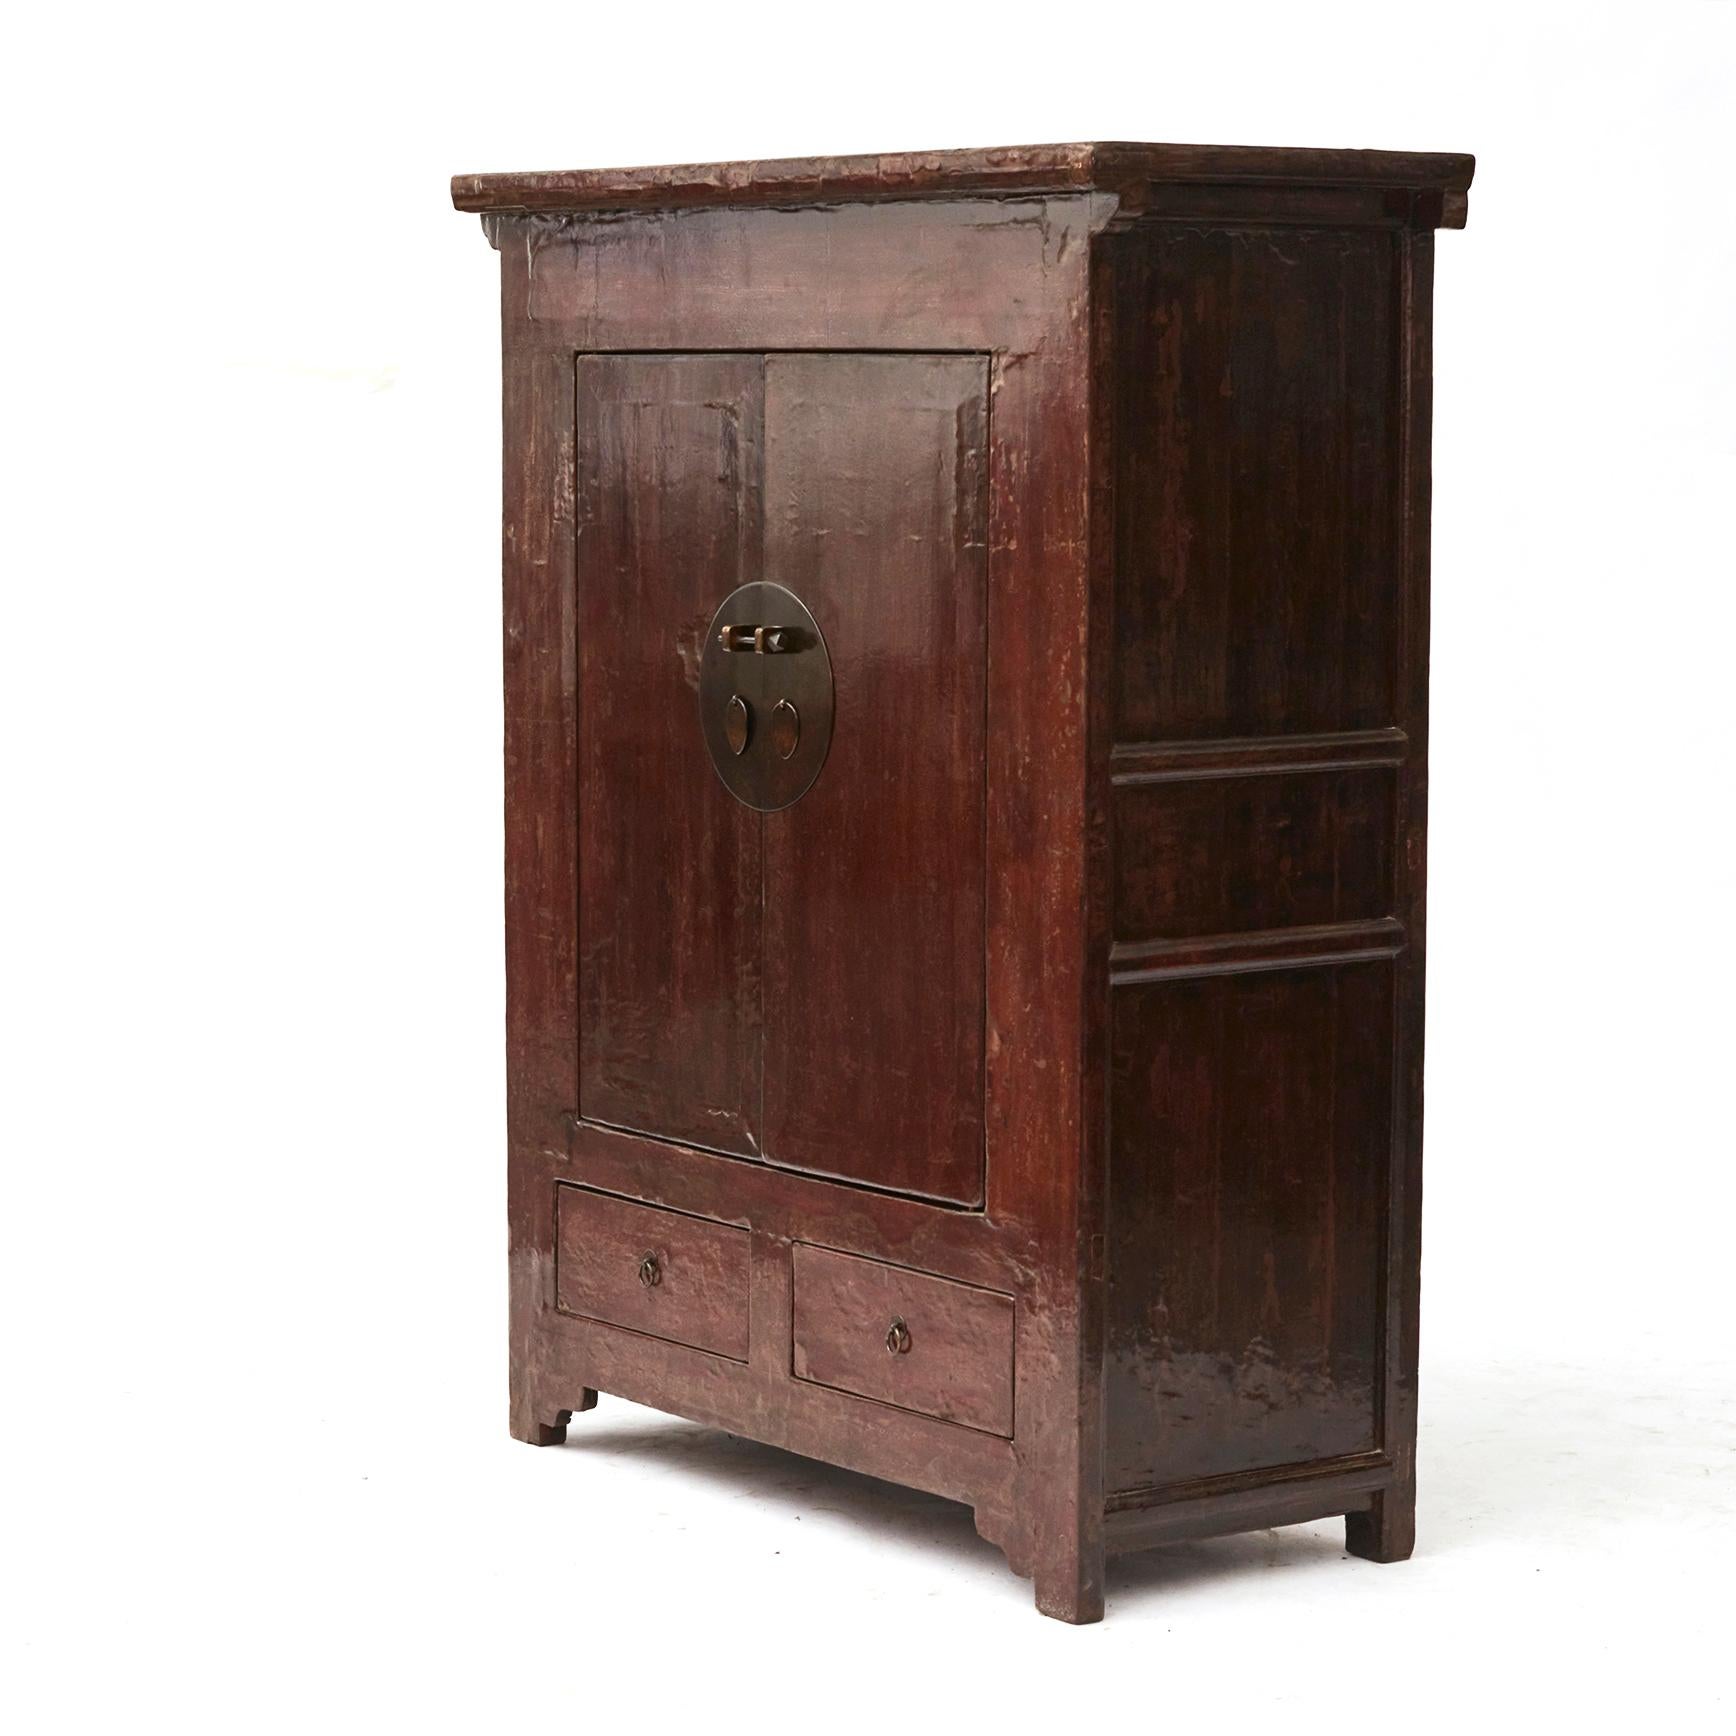 A early 19th century qing dynasty cabinet boasting a deep red patina from the Shanxi Province, circa. 1820-1830.
The façade showcases two doors fitted with a traditional round medallion lock, opening to reveal two inner shelves for storage space.